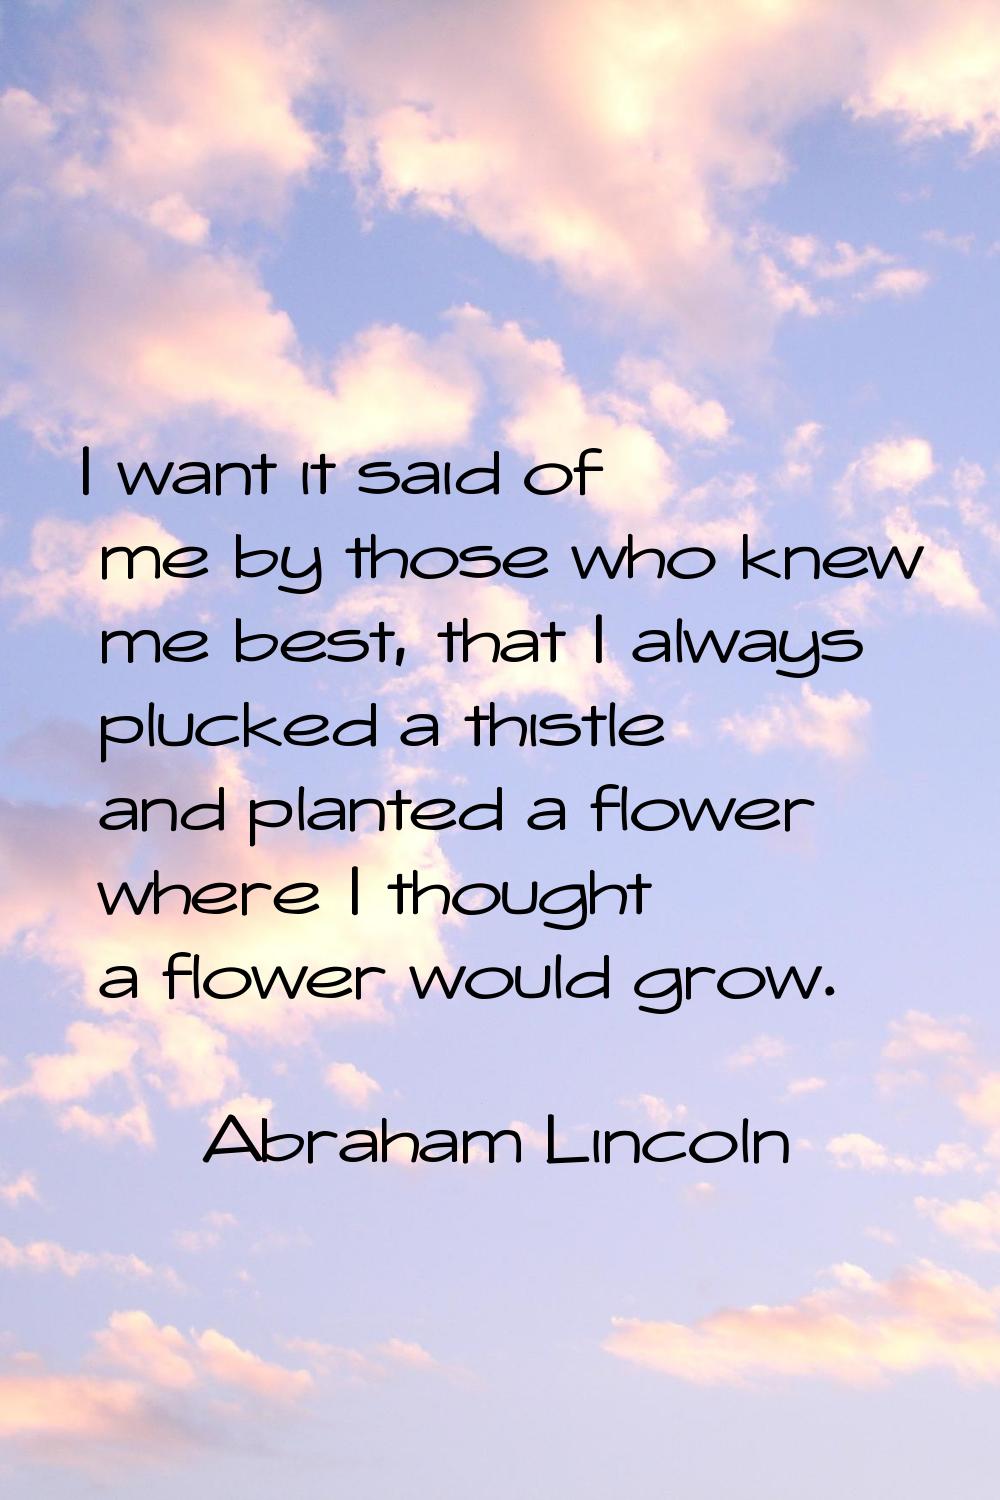 I want it said of me by those who knew me best, that I always plucked a thistle and planted a flowe